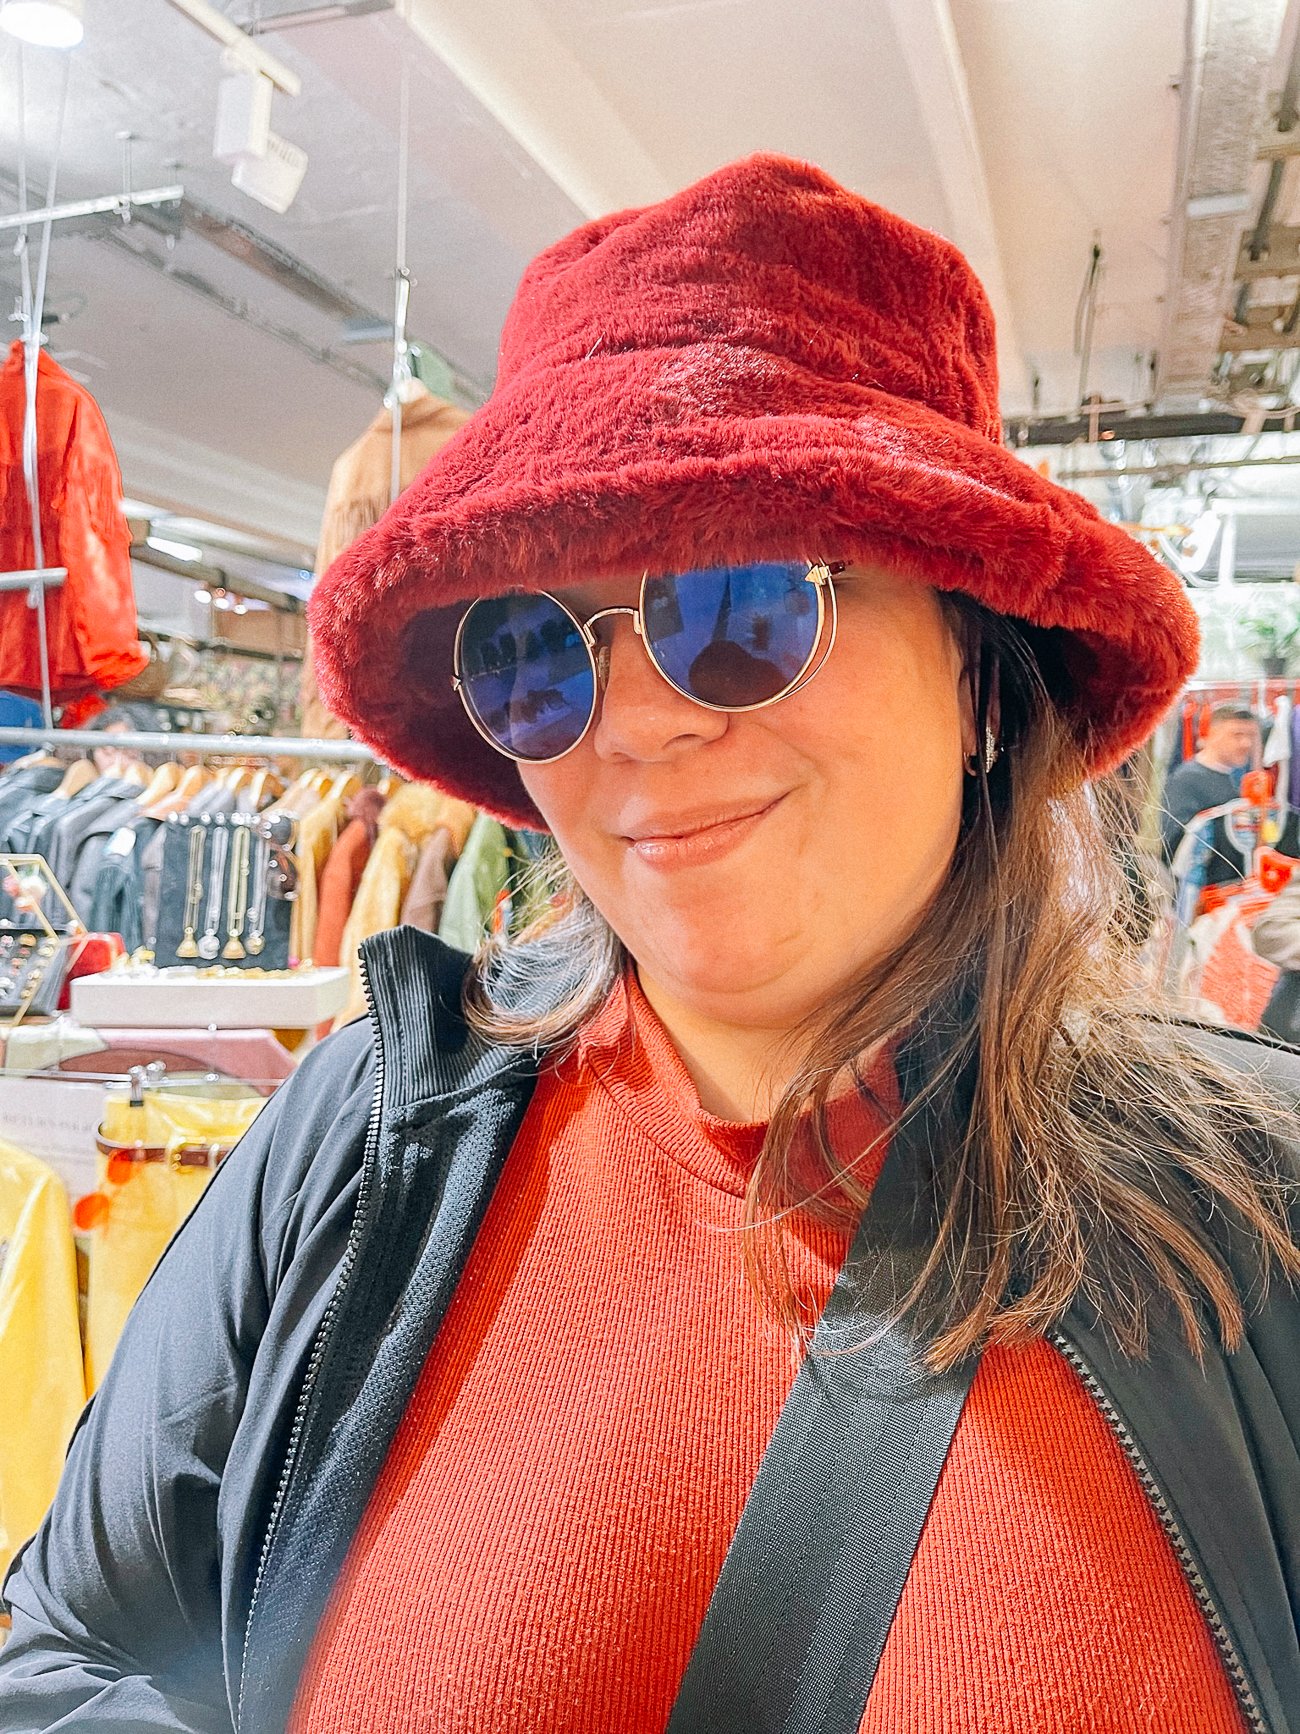 Kim wearing sunglasses and a fuzzy red bucket hat